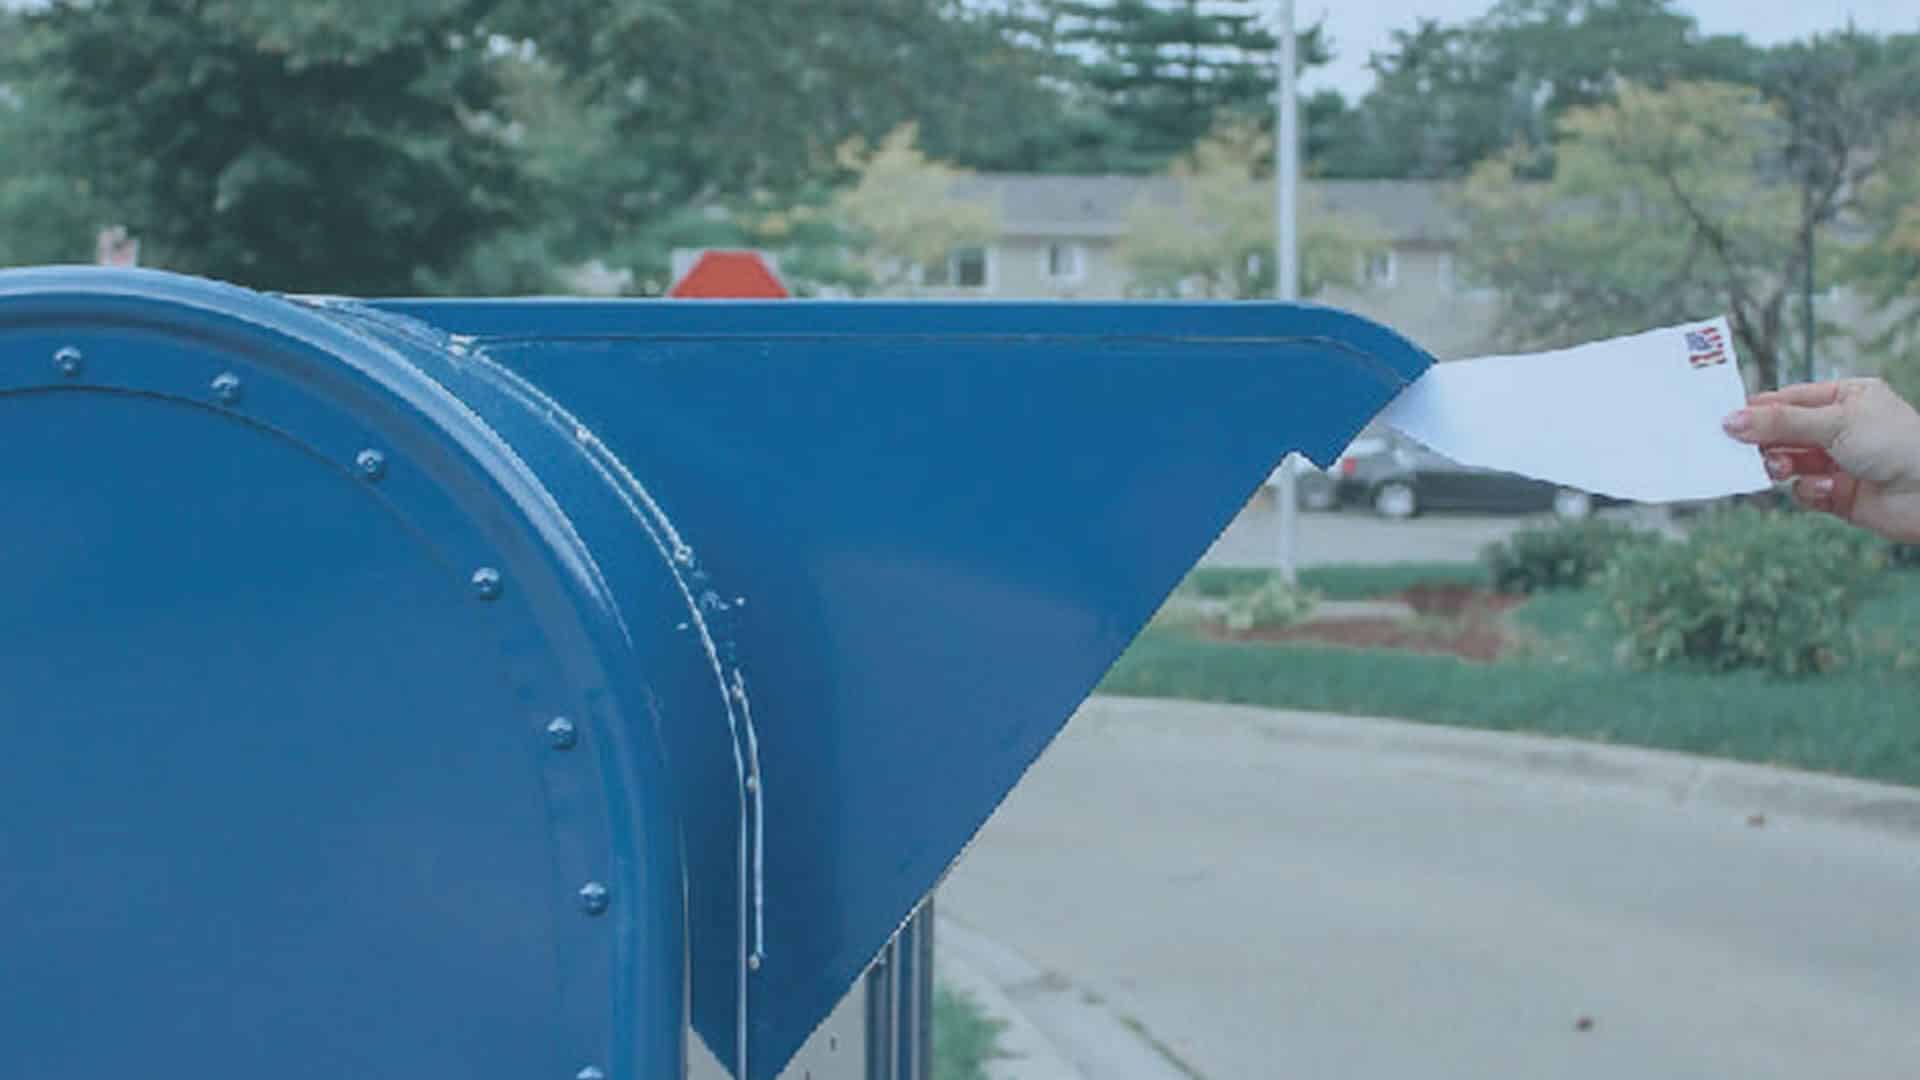 Federal Judge Requires USPS to Approve Overtime